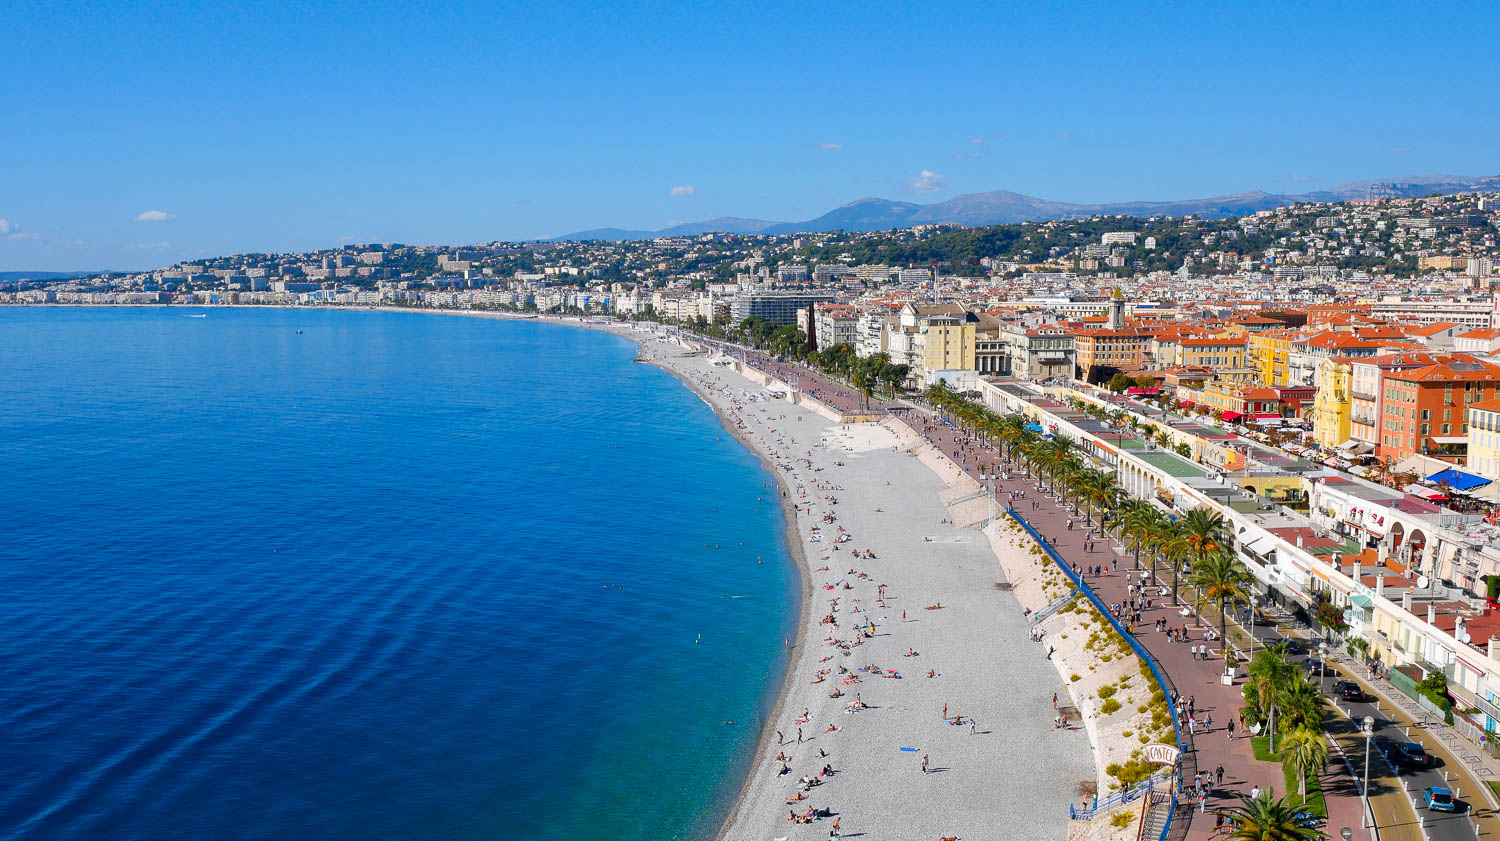 The view of Nice from the Bellanda Tower - 2 Days Nice itinerary - Nice things to do